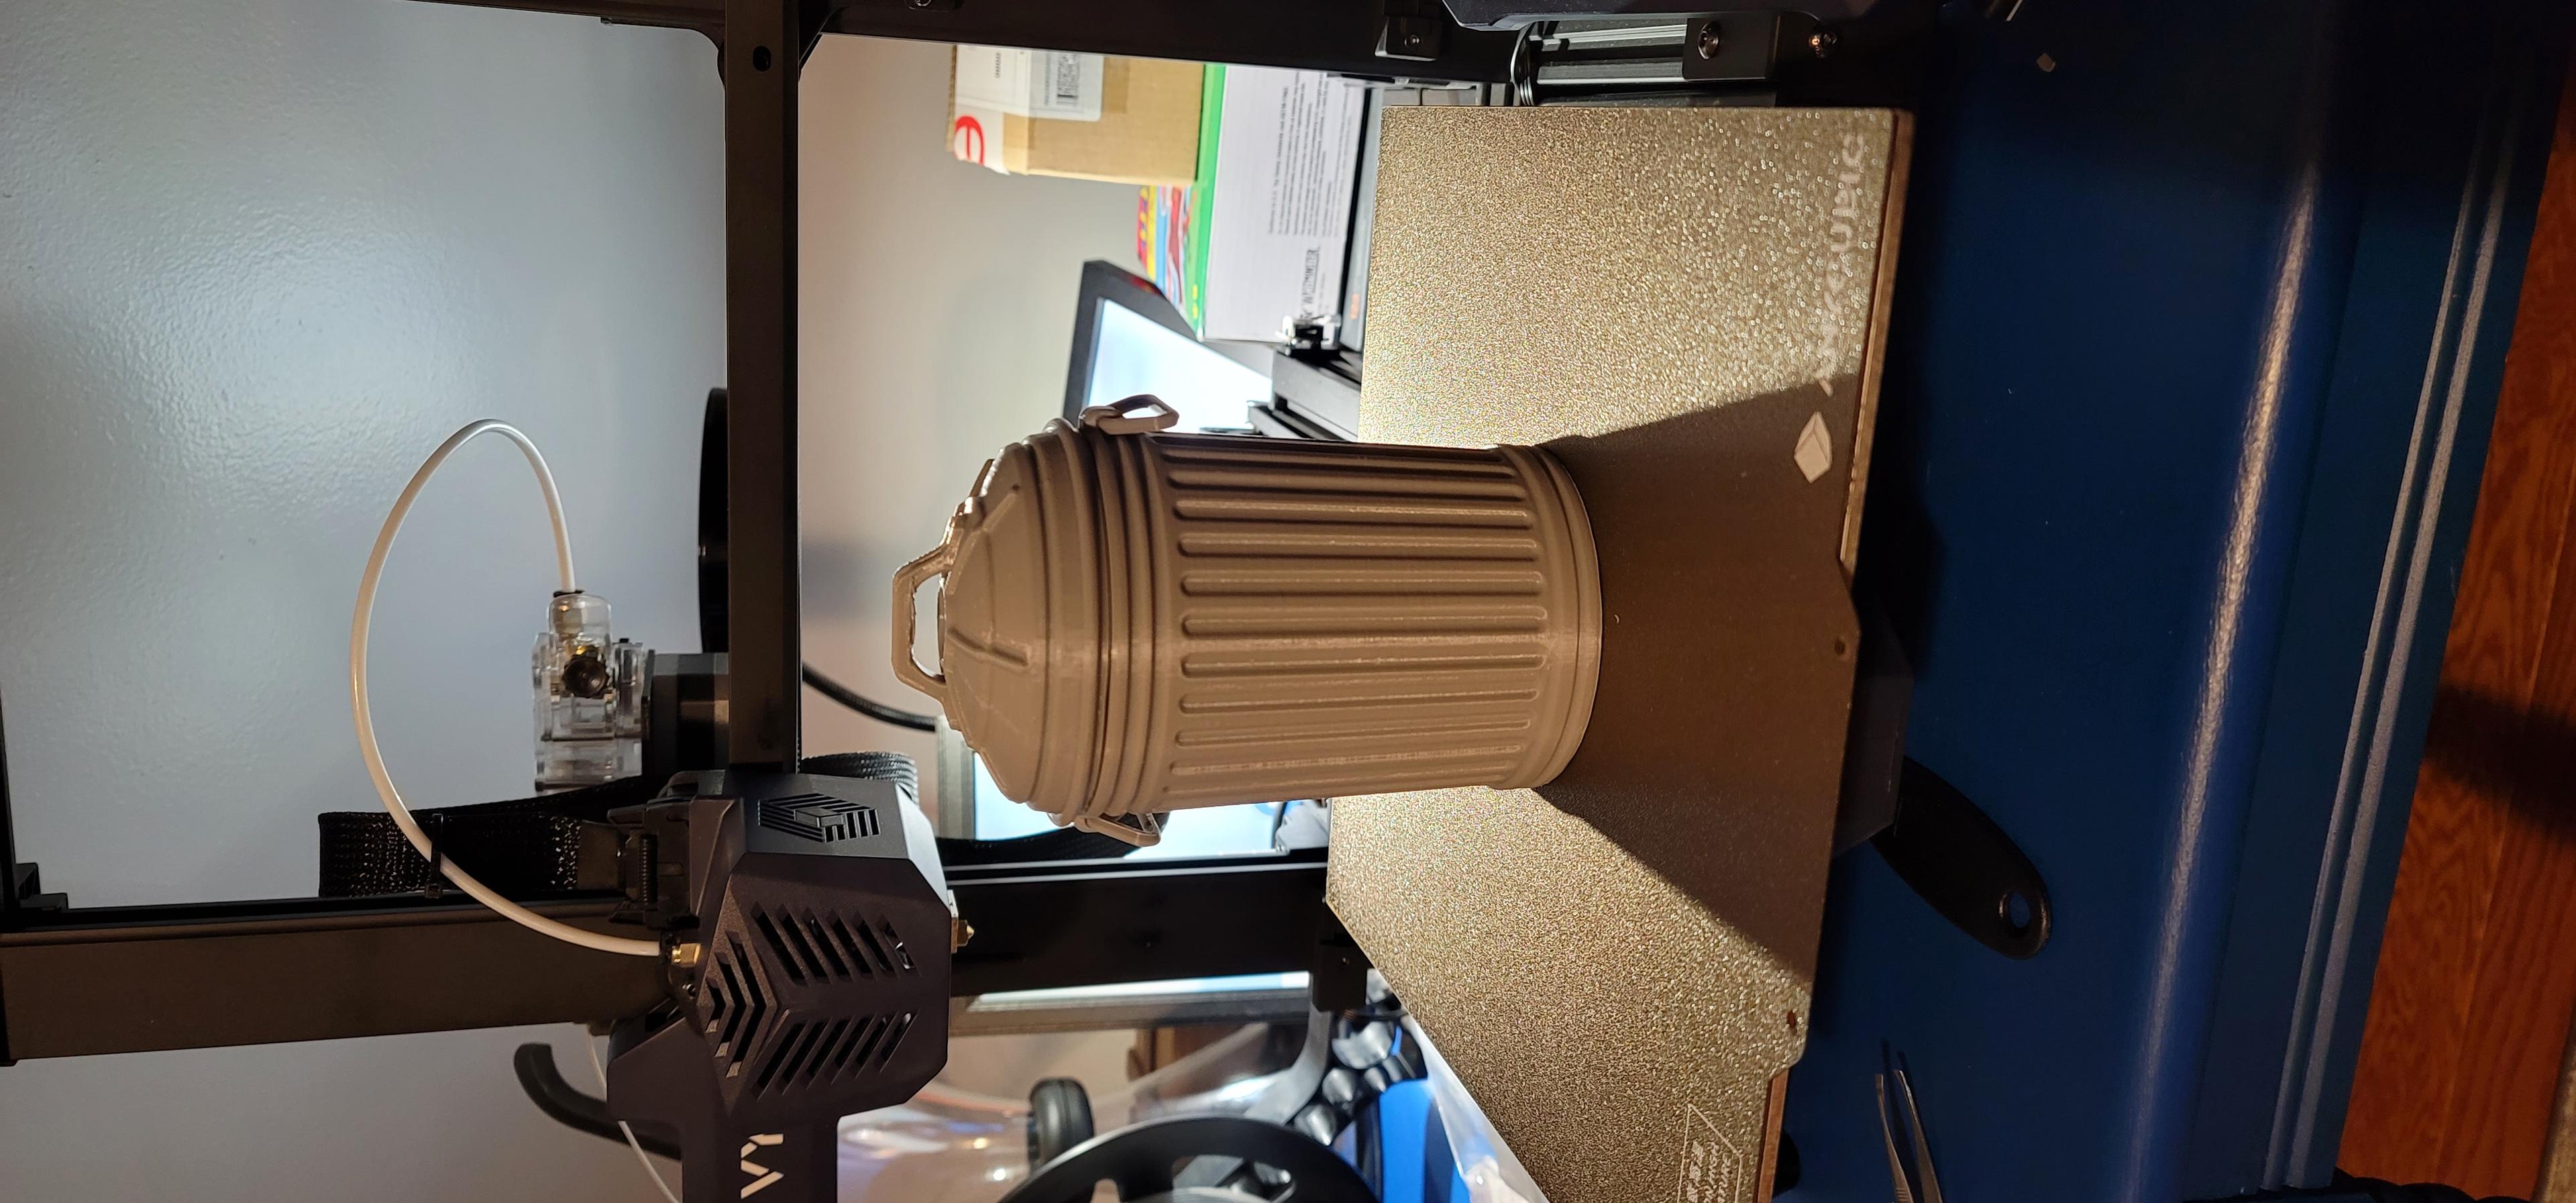 Metal Trash Can  - Just got started with 3d printing. I only have the color gray at the moment. I have been following you on tic toc and when i saw this i had to print it. It came out great and it is the longest print so far that i have done. - 3d model